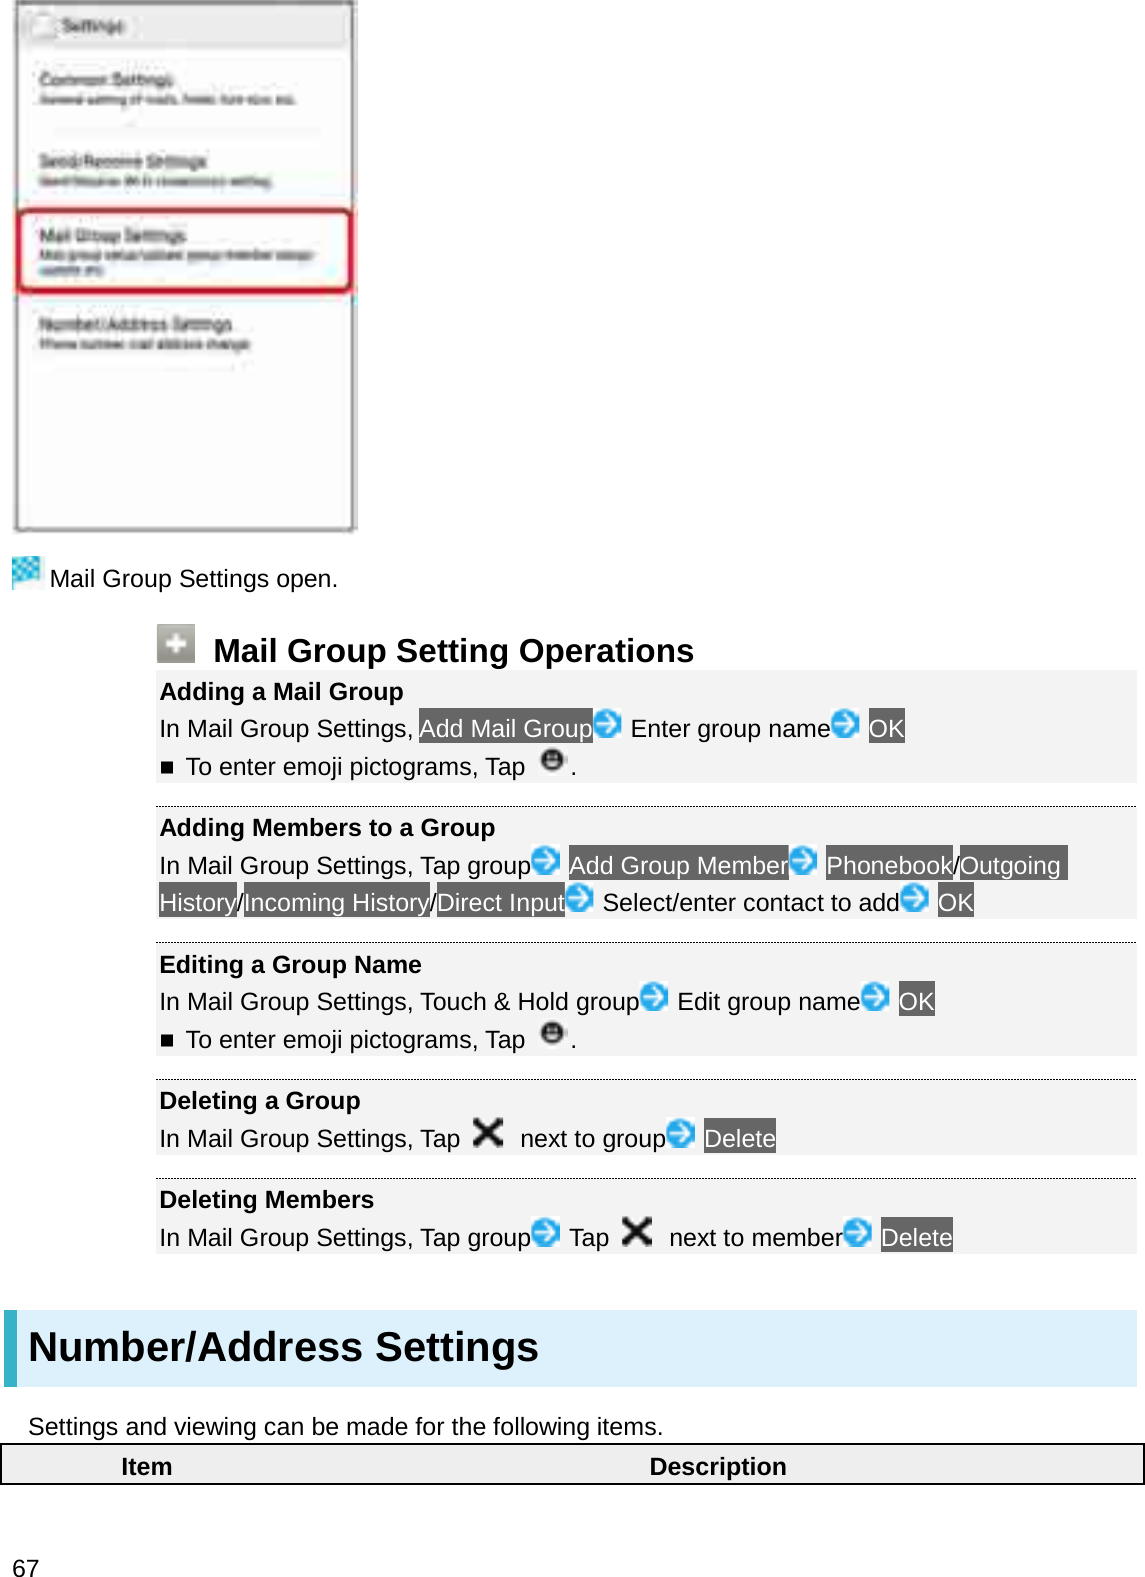 Mail Group Settings open.Mail Group Setting OperationsAdding a Mail GroupIn Mail Group Settings, Add Mail Group Enter group name OKTo enter emoji pictograms, Tap .Adding Members to a GroupIn Mail Group Settings, Tap group Add Group Member Phonebook/Outgoing History/Incoming History/Direct Input Select/enter contact to add OKEditing a Group NameIn Mail Group Settings, Touch &amp; Hold group Edit group name OKTo enter emoji pictograms, Tap .Deleting a GroupIn Mail Group Settings, Tap  next to group DeleteDeleting MembersIn Mail Group Settings, Tap group Tap  next to member DeleteNumber/Address SettingsSettings and viewing can be made for the following items.Item Description67